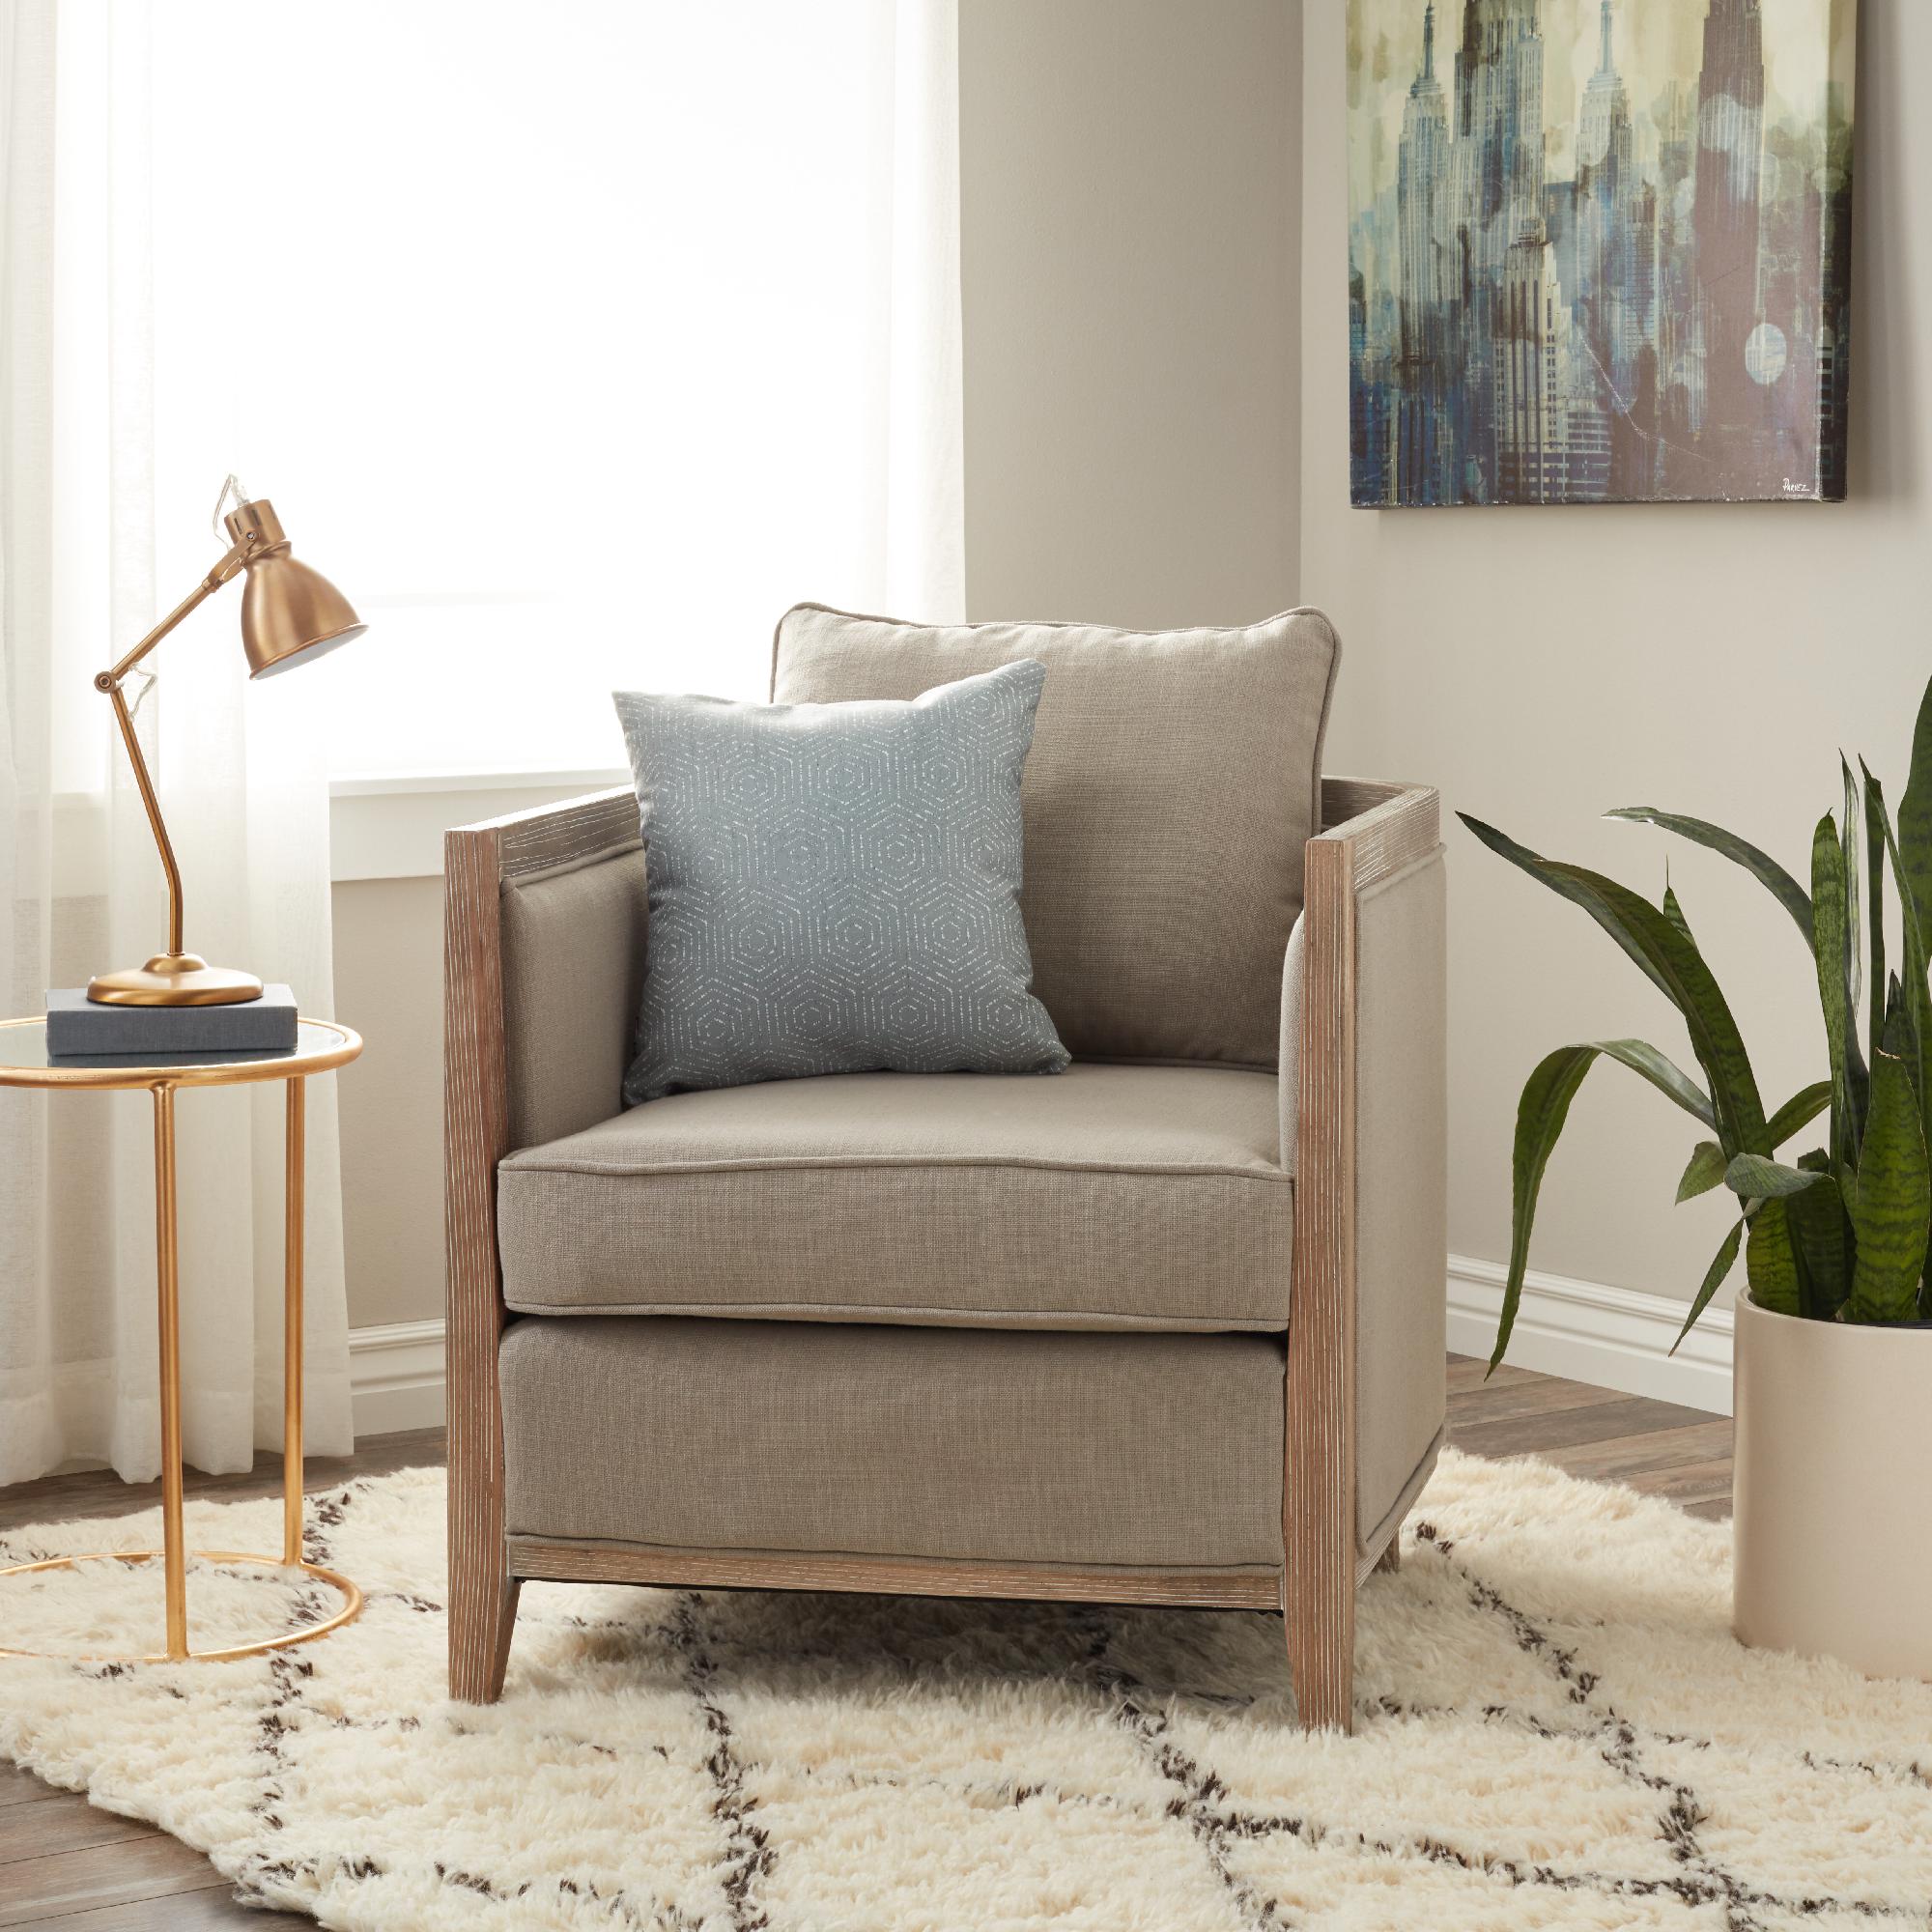 save an extra 10% on Select Furniture*